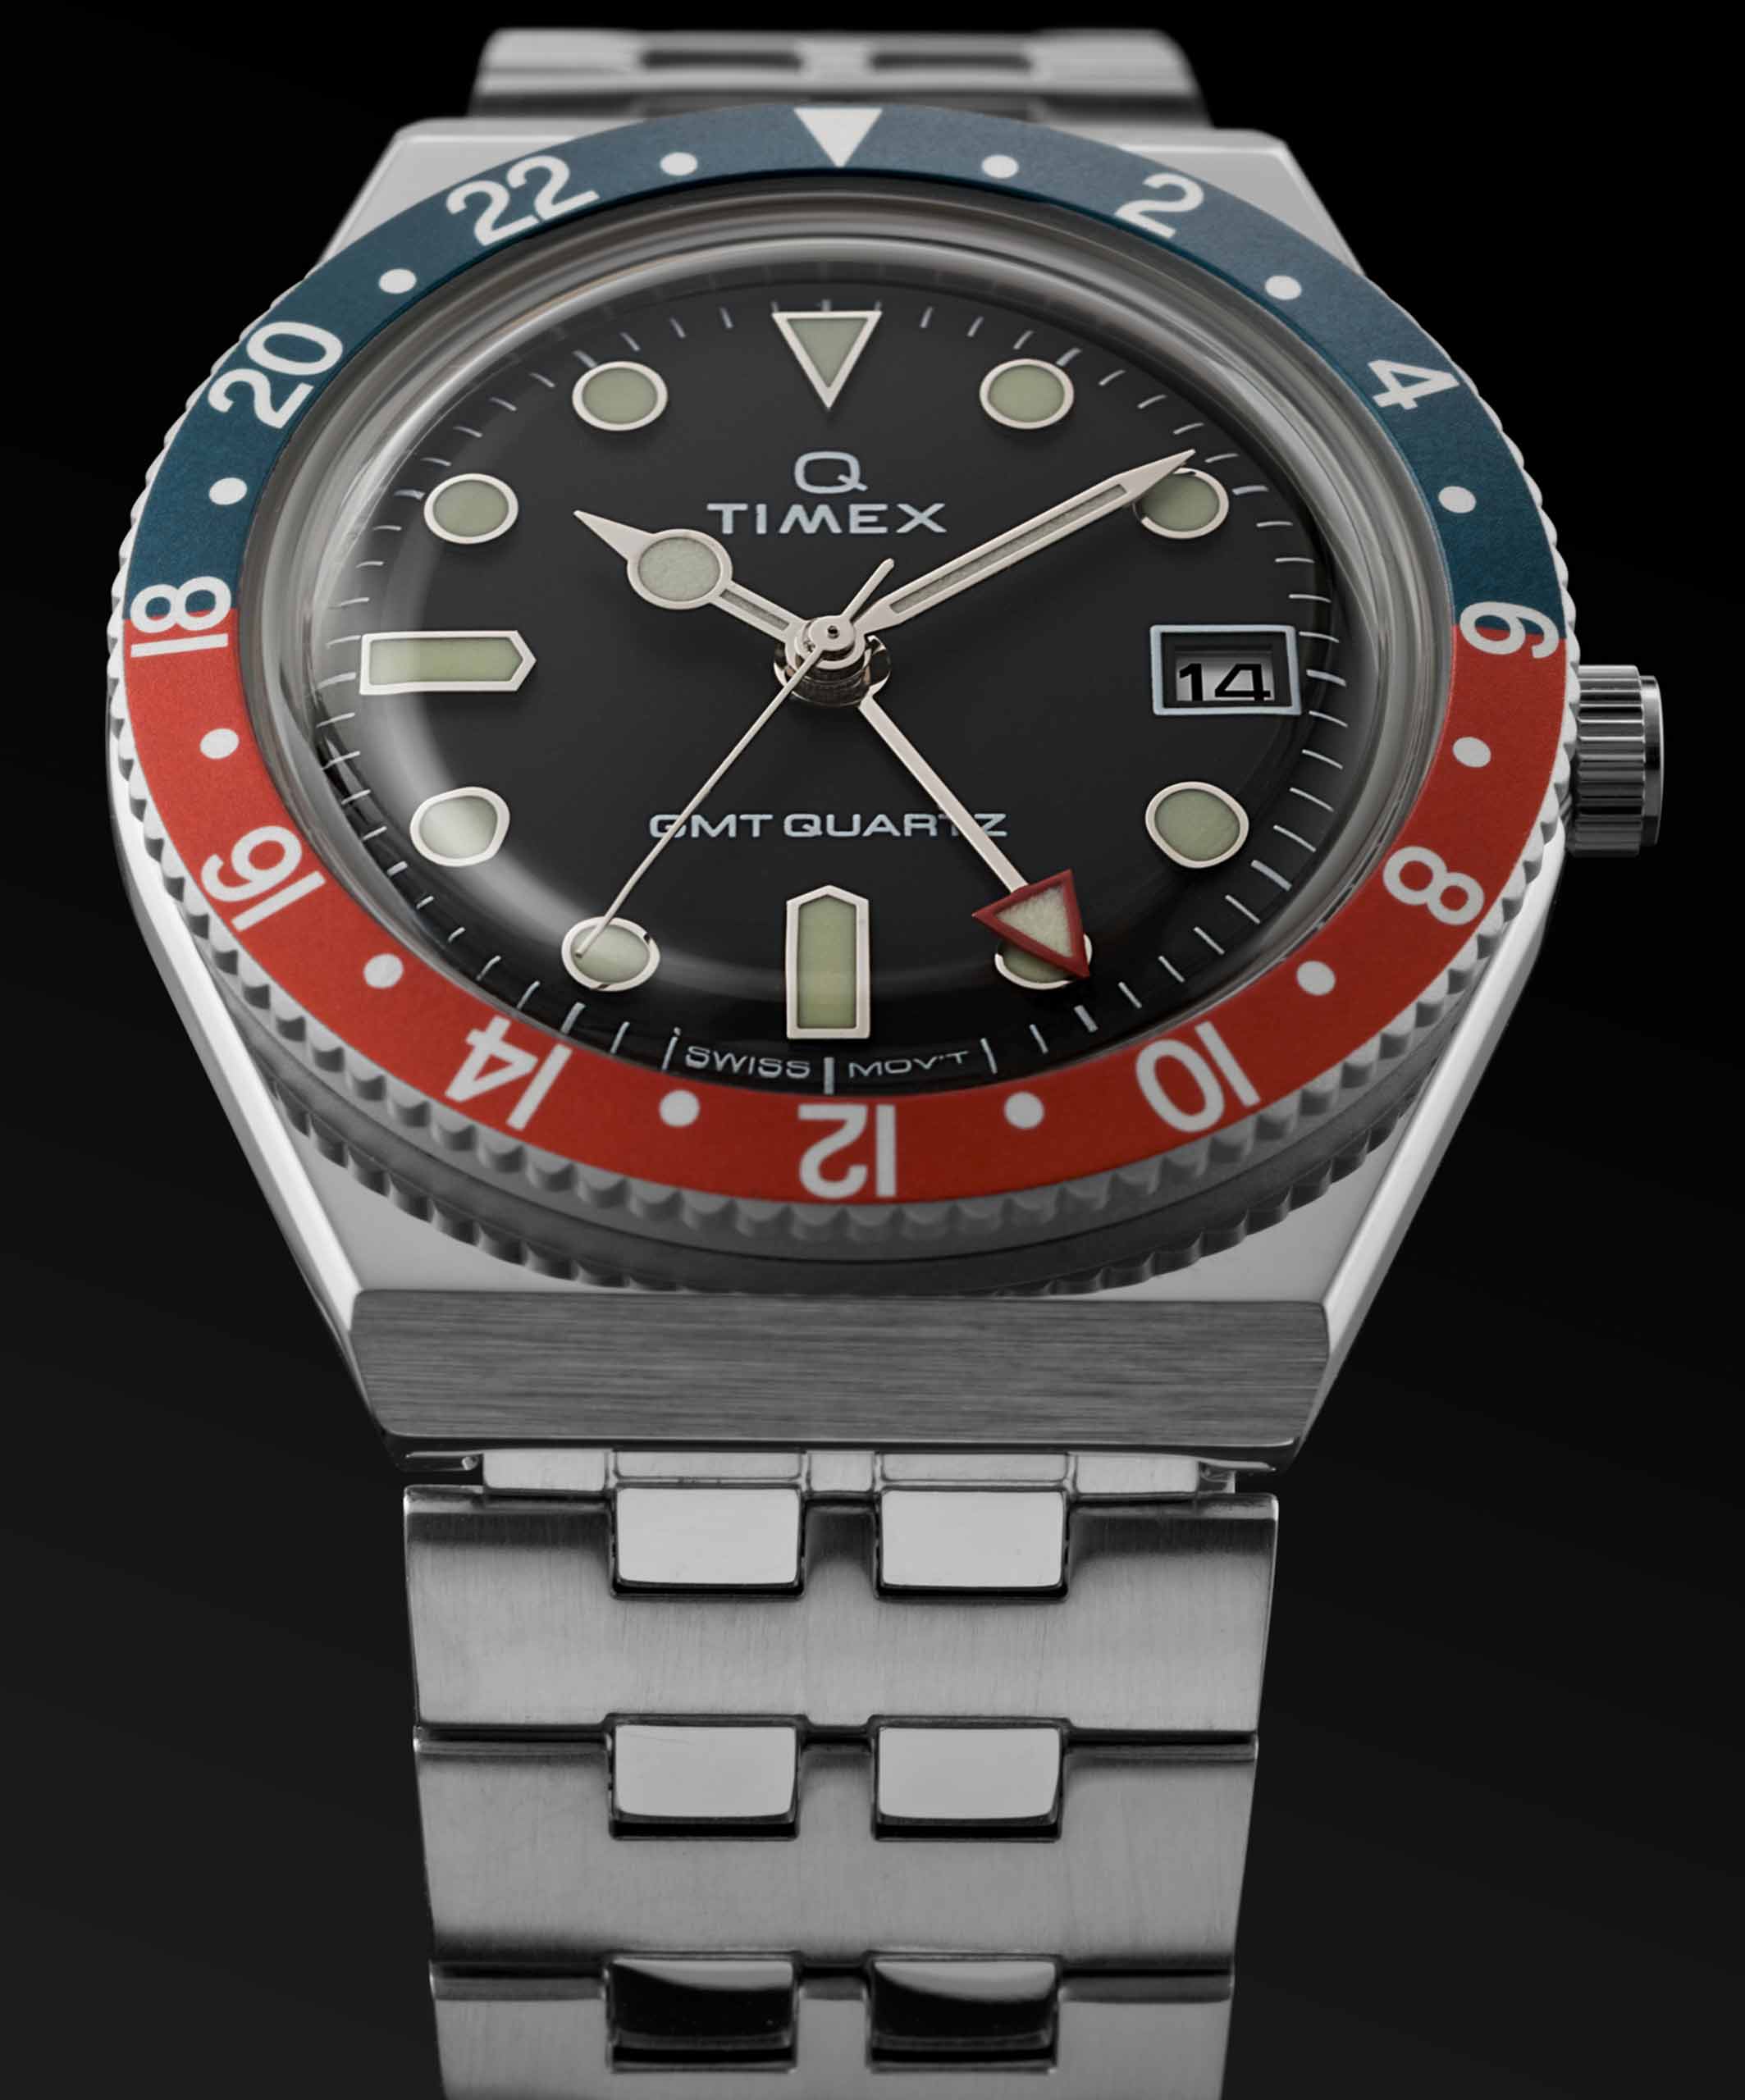 Timex Adds a GMT to the Q Lineup - Worn & Wound